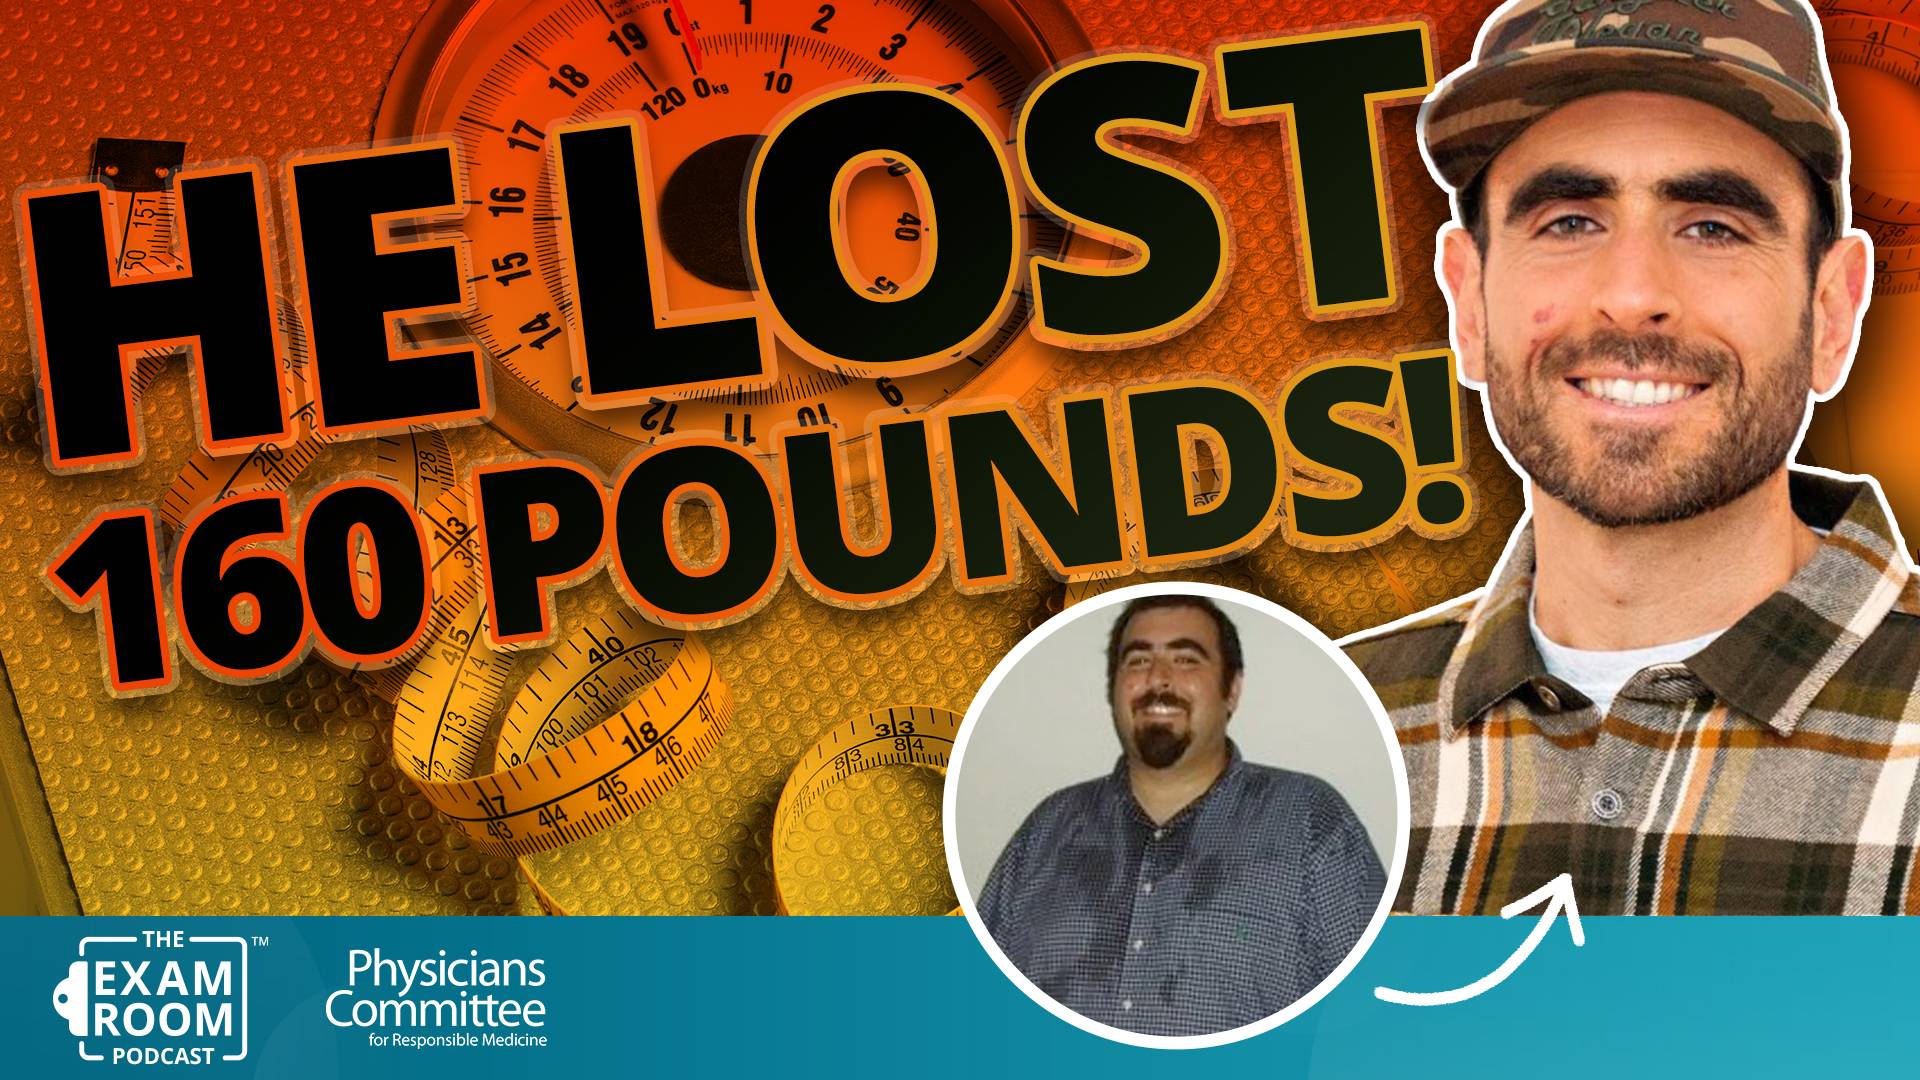 He Lost 160 Pounds Going Vegan and Got His Life Back | Anthony Masiello